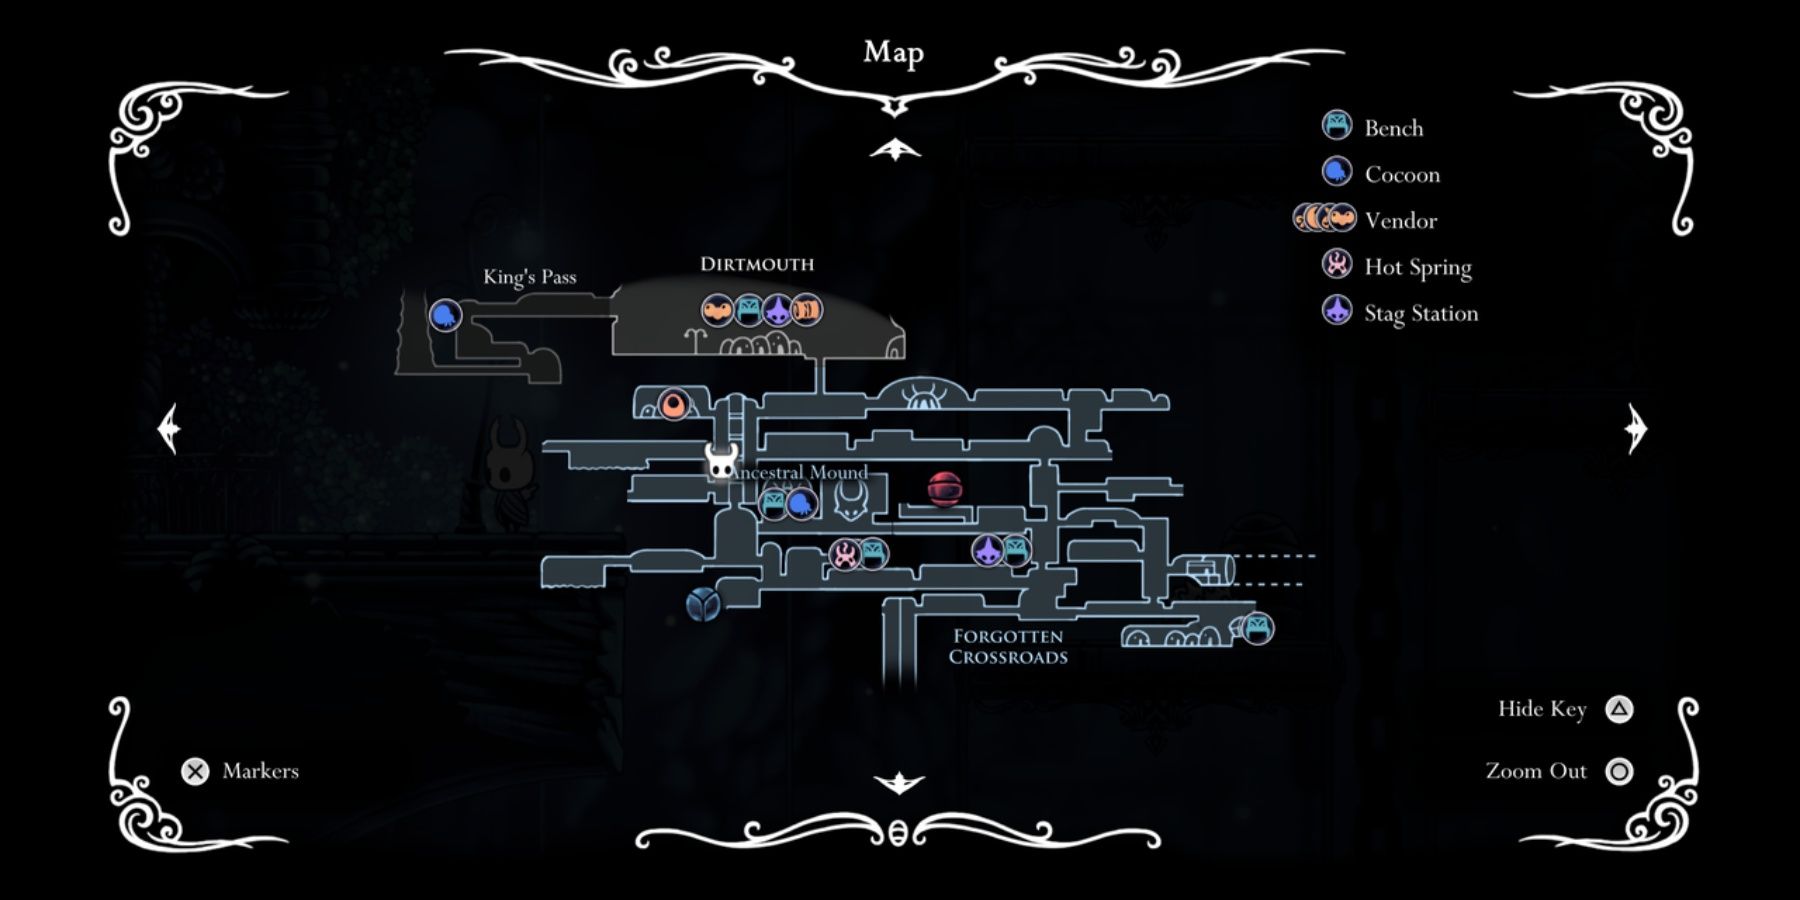 hollow knight map